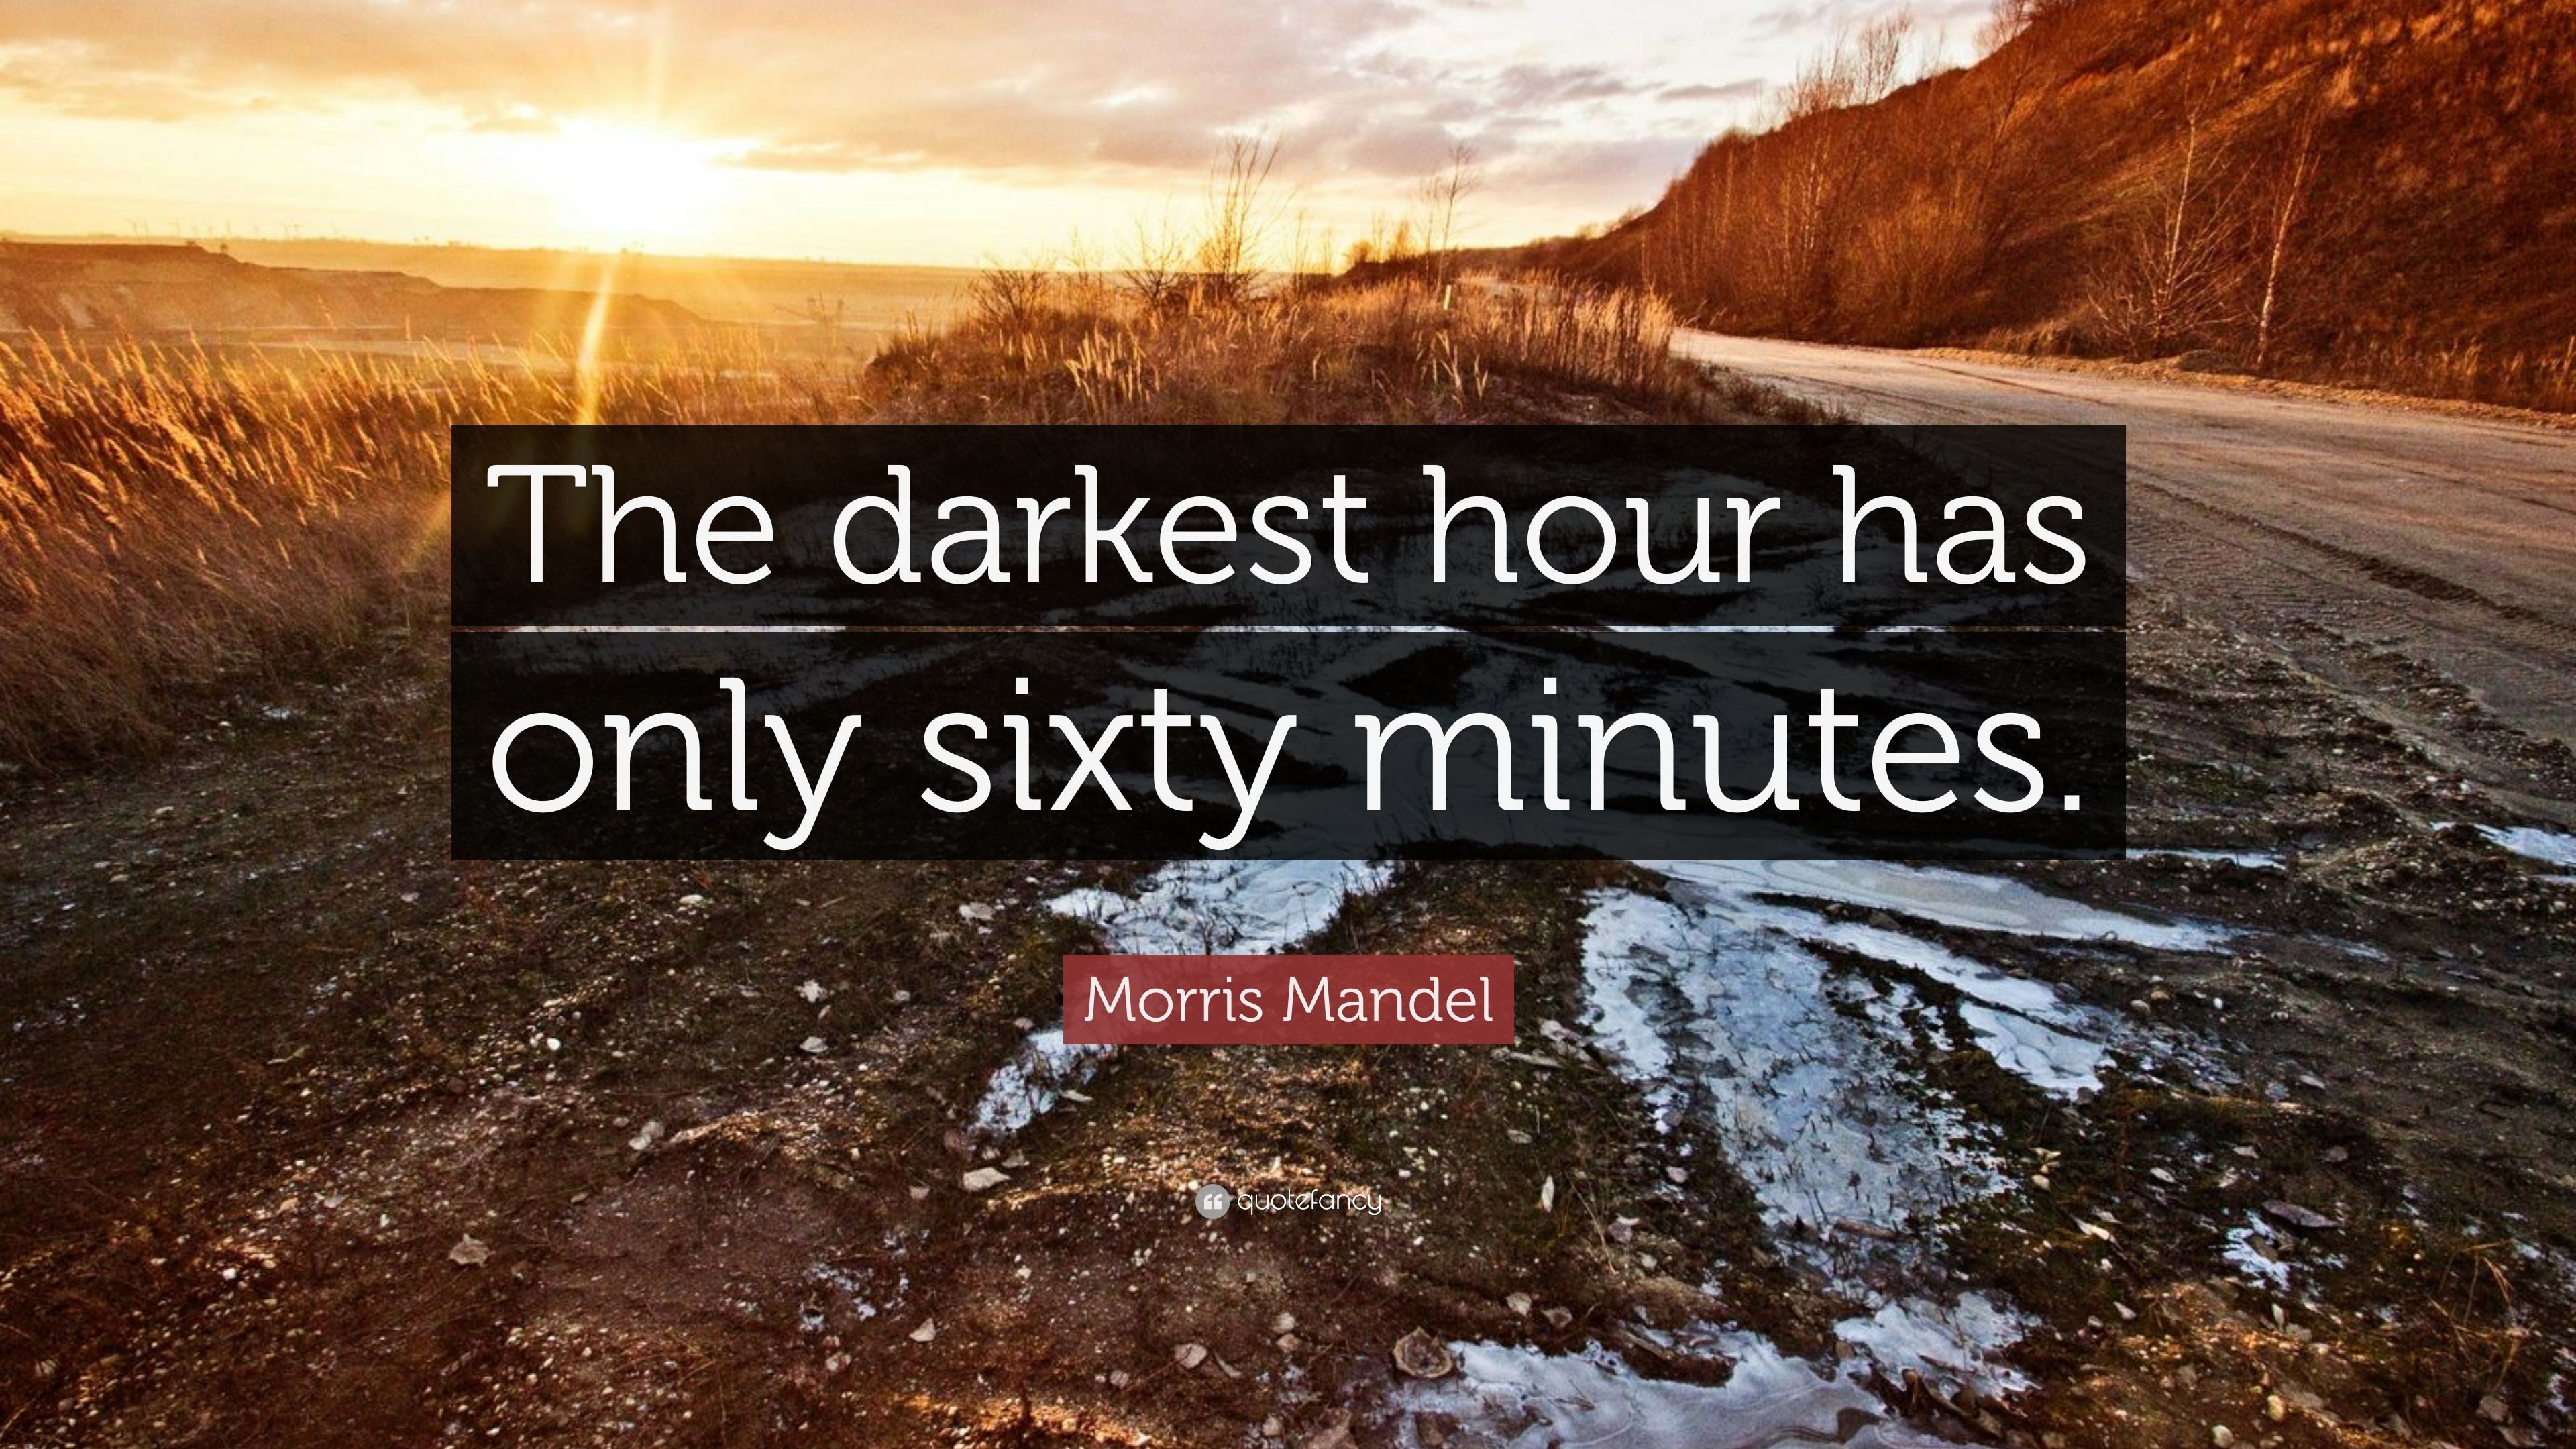 Morris Mandel Quote: “The darkest hour has only sixty minutes